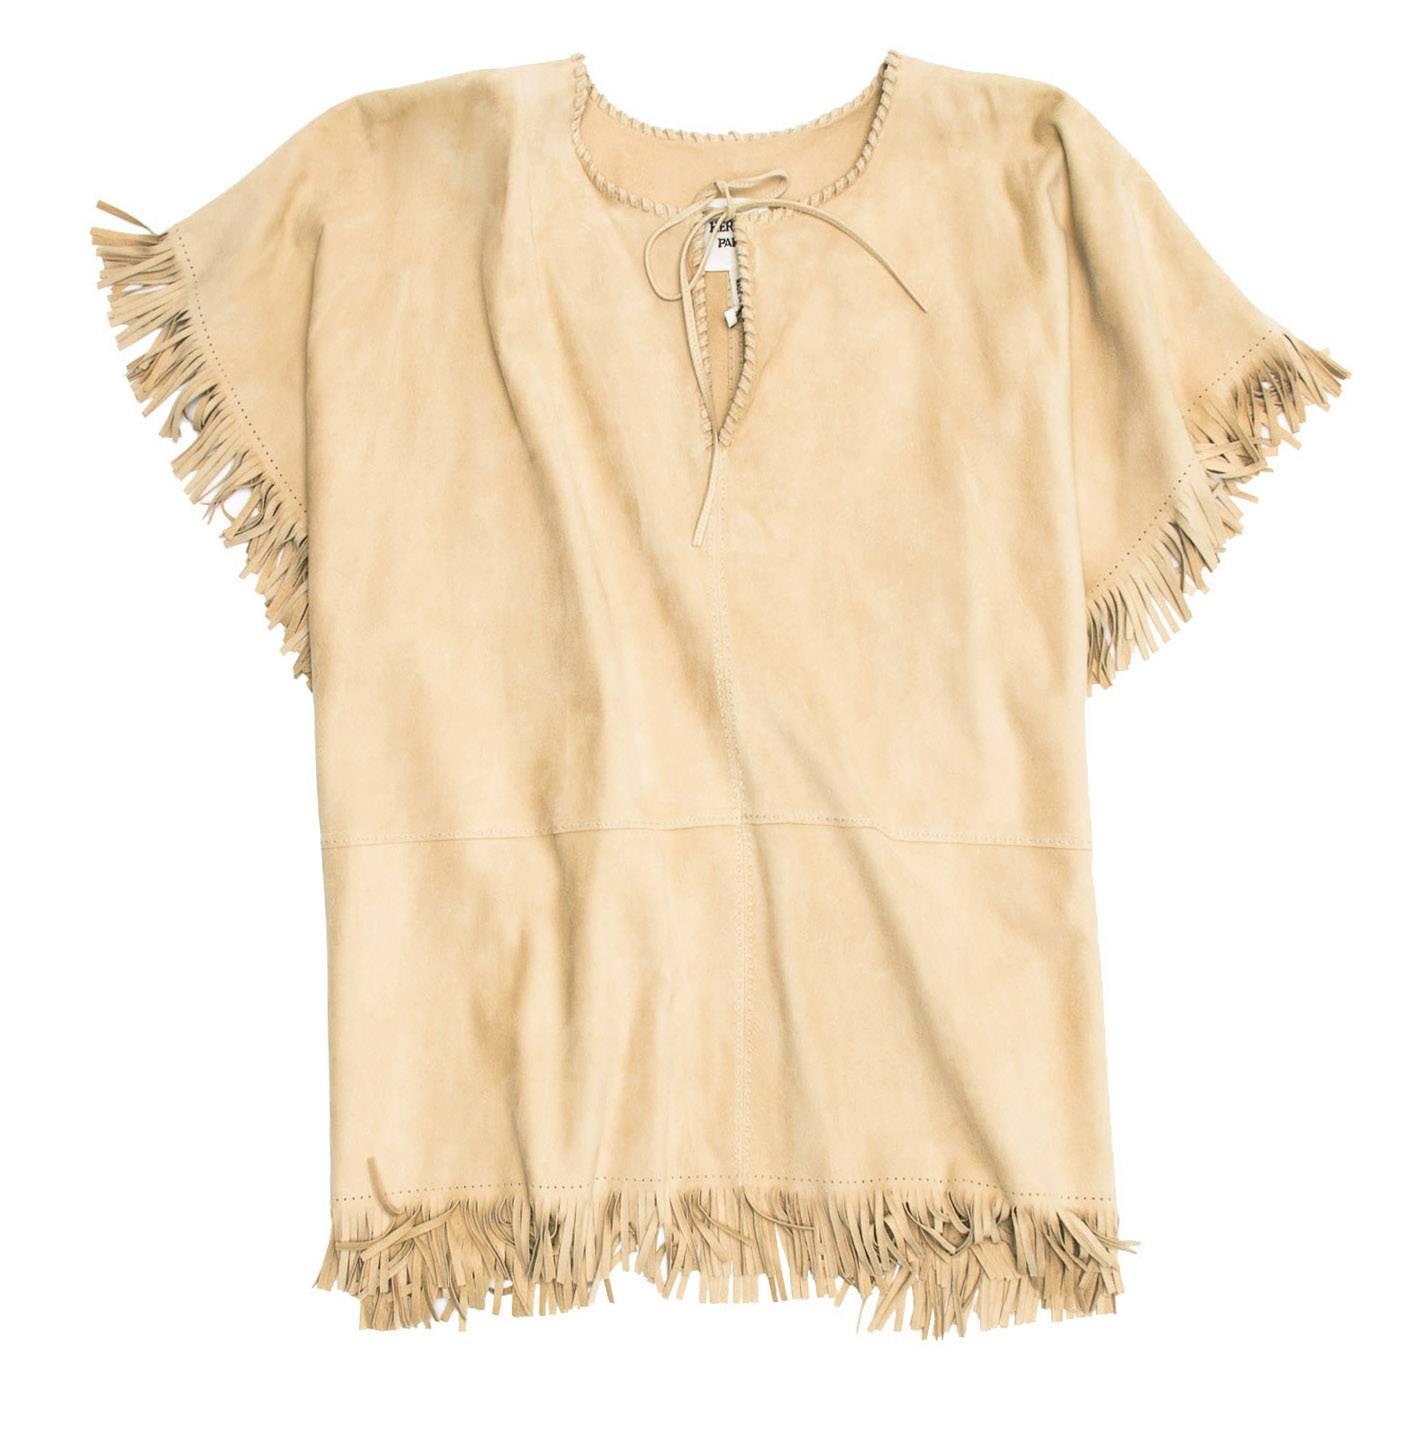 Natural color suede fringe poncho with whip-stitch V-neck tie collar and hidden ties at waist area.

Size: One size

Condition  Excellent: never worn